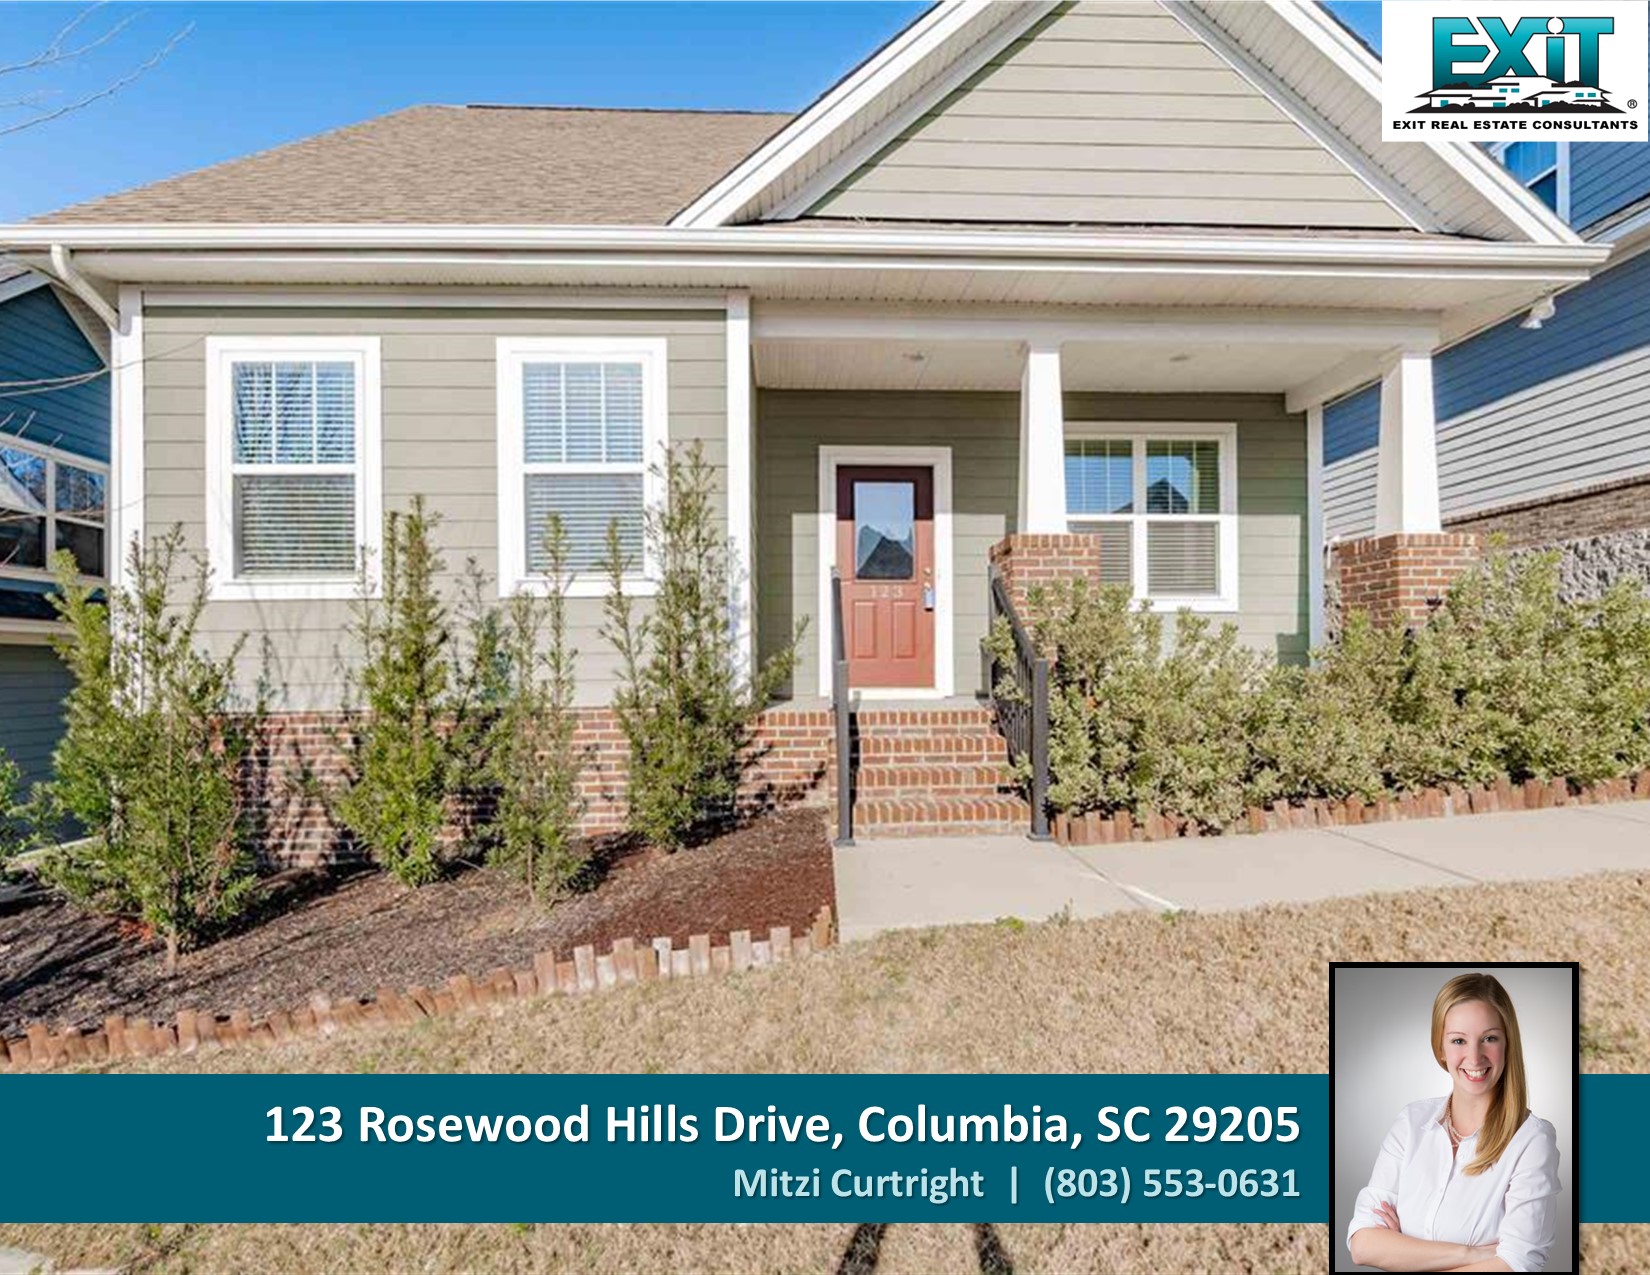 Just listed in Rosewood Hills